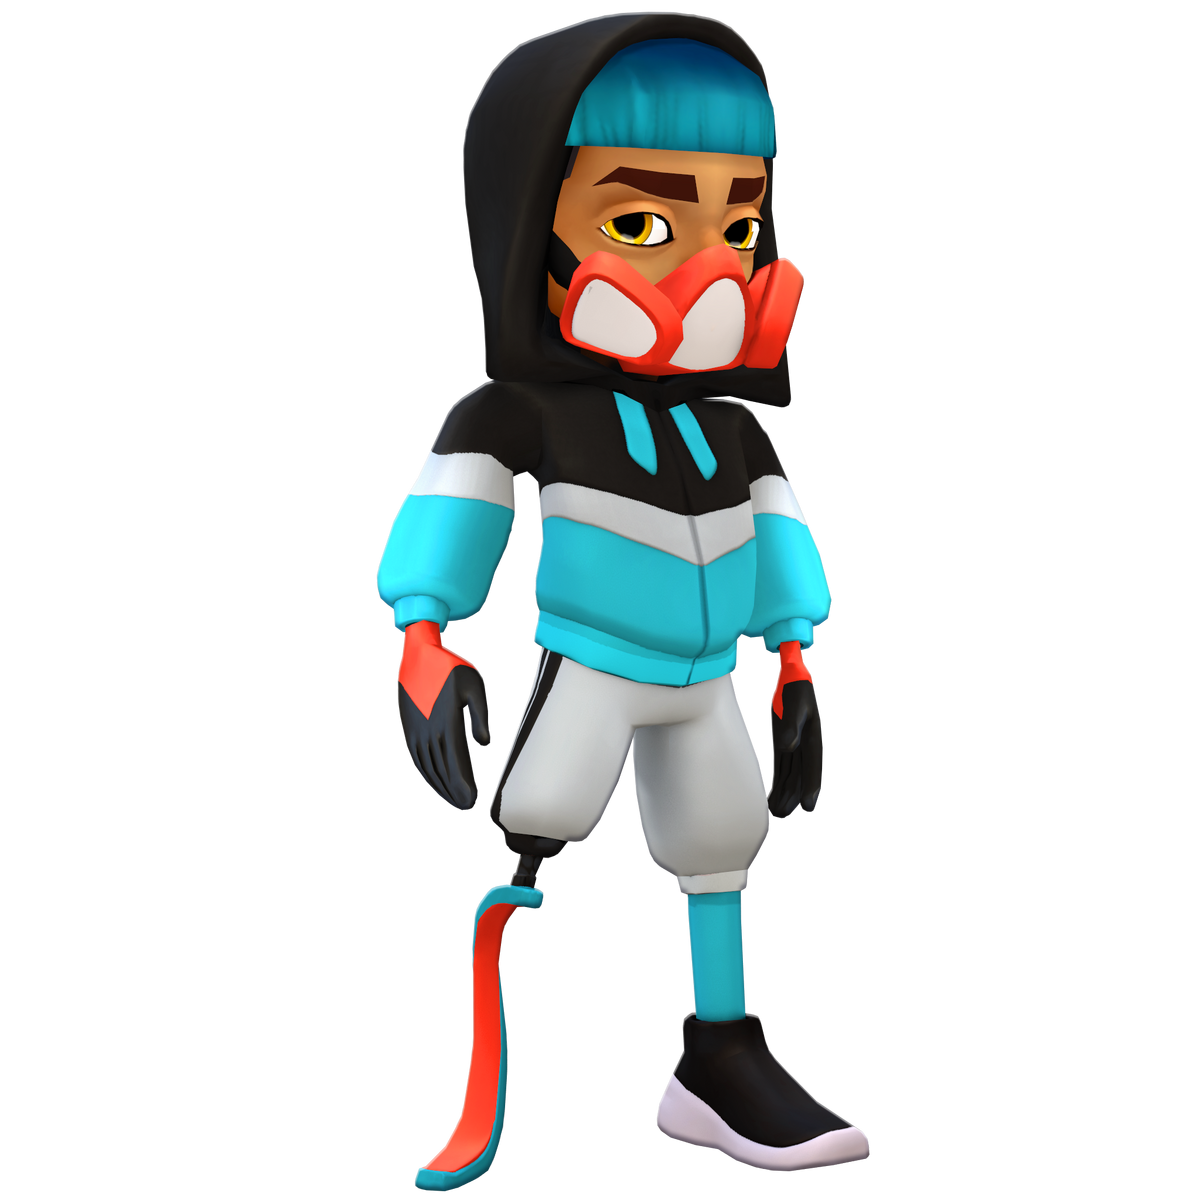 Subway Surfers Boys' 2 Piece Muscle Slee 